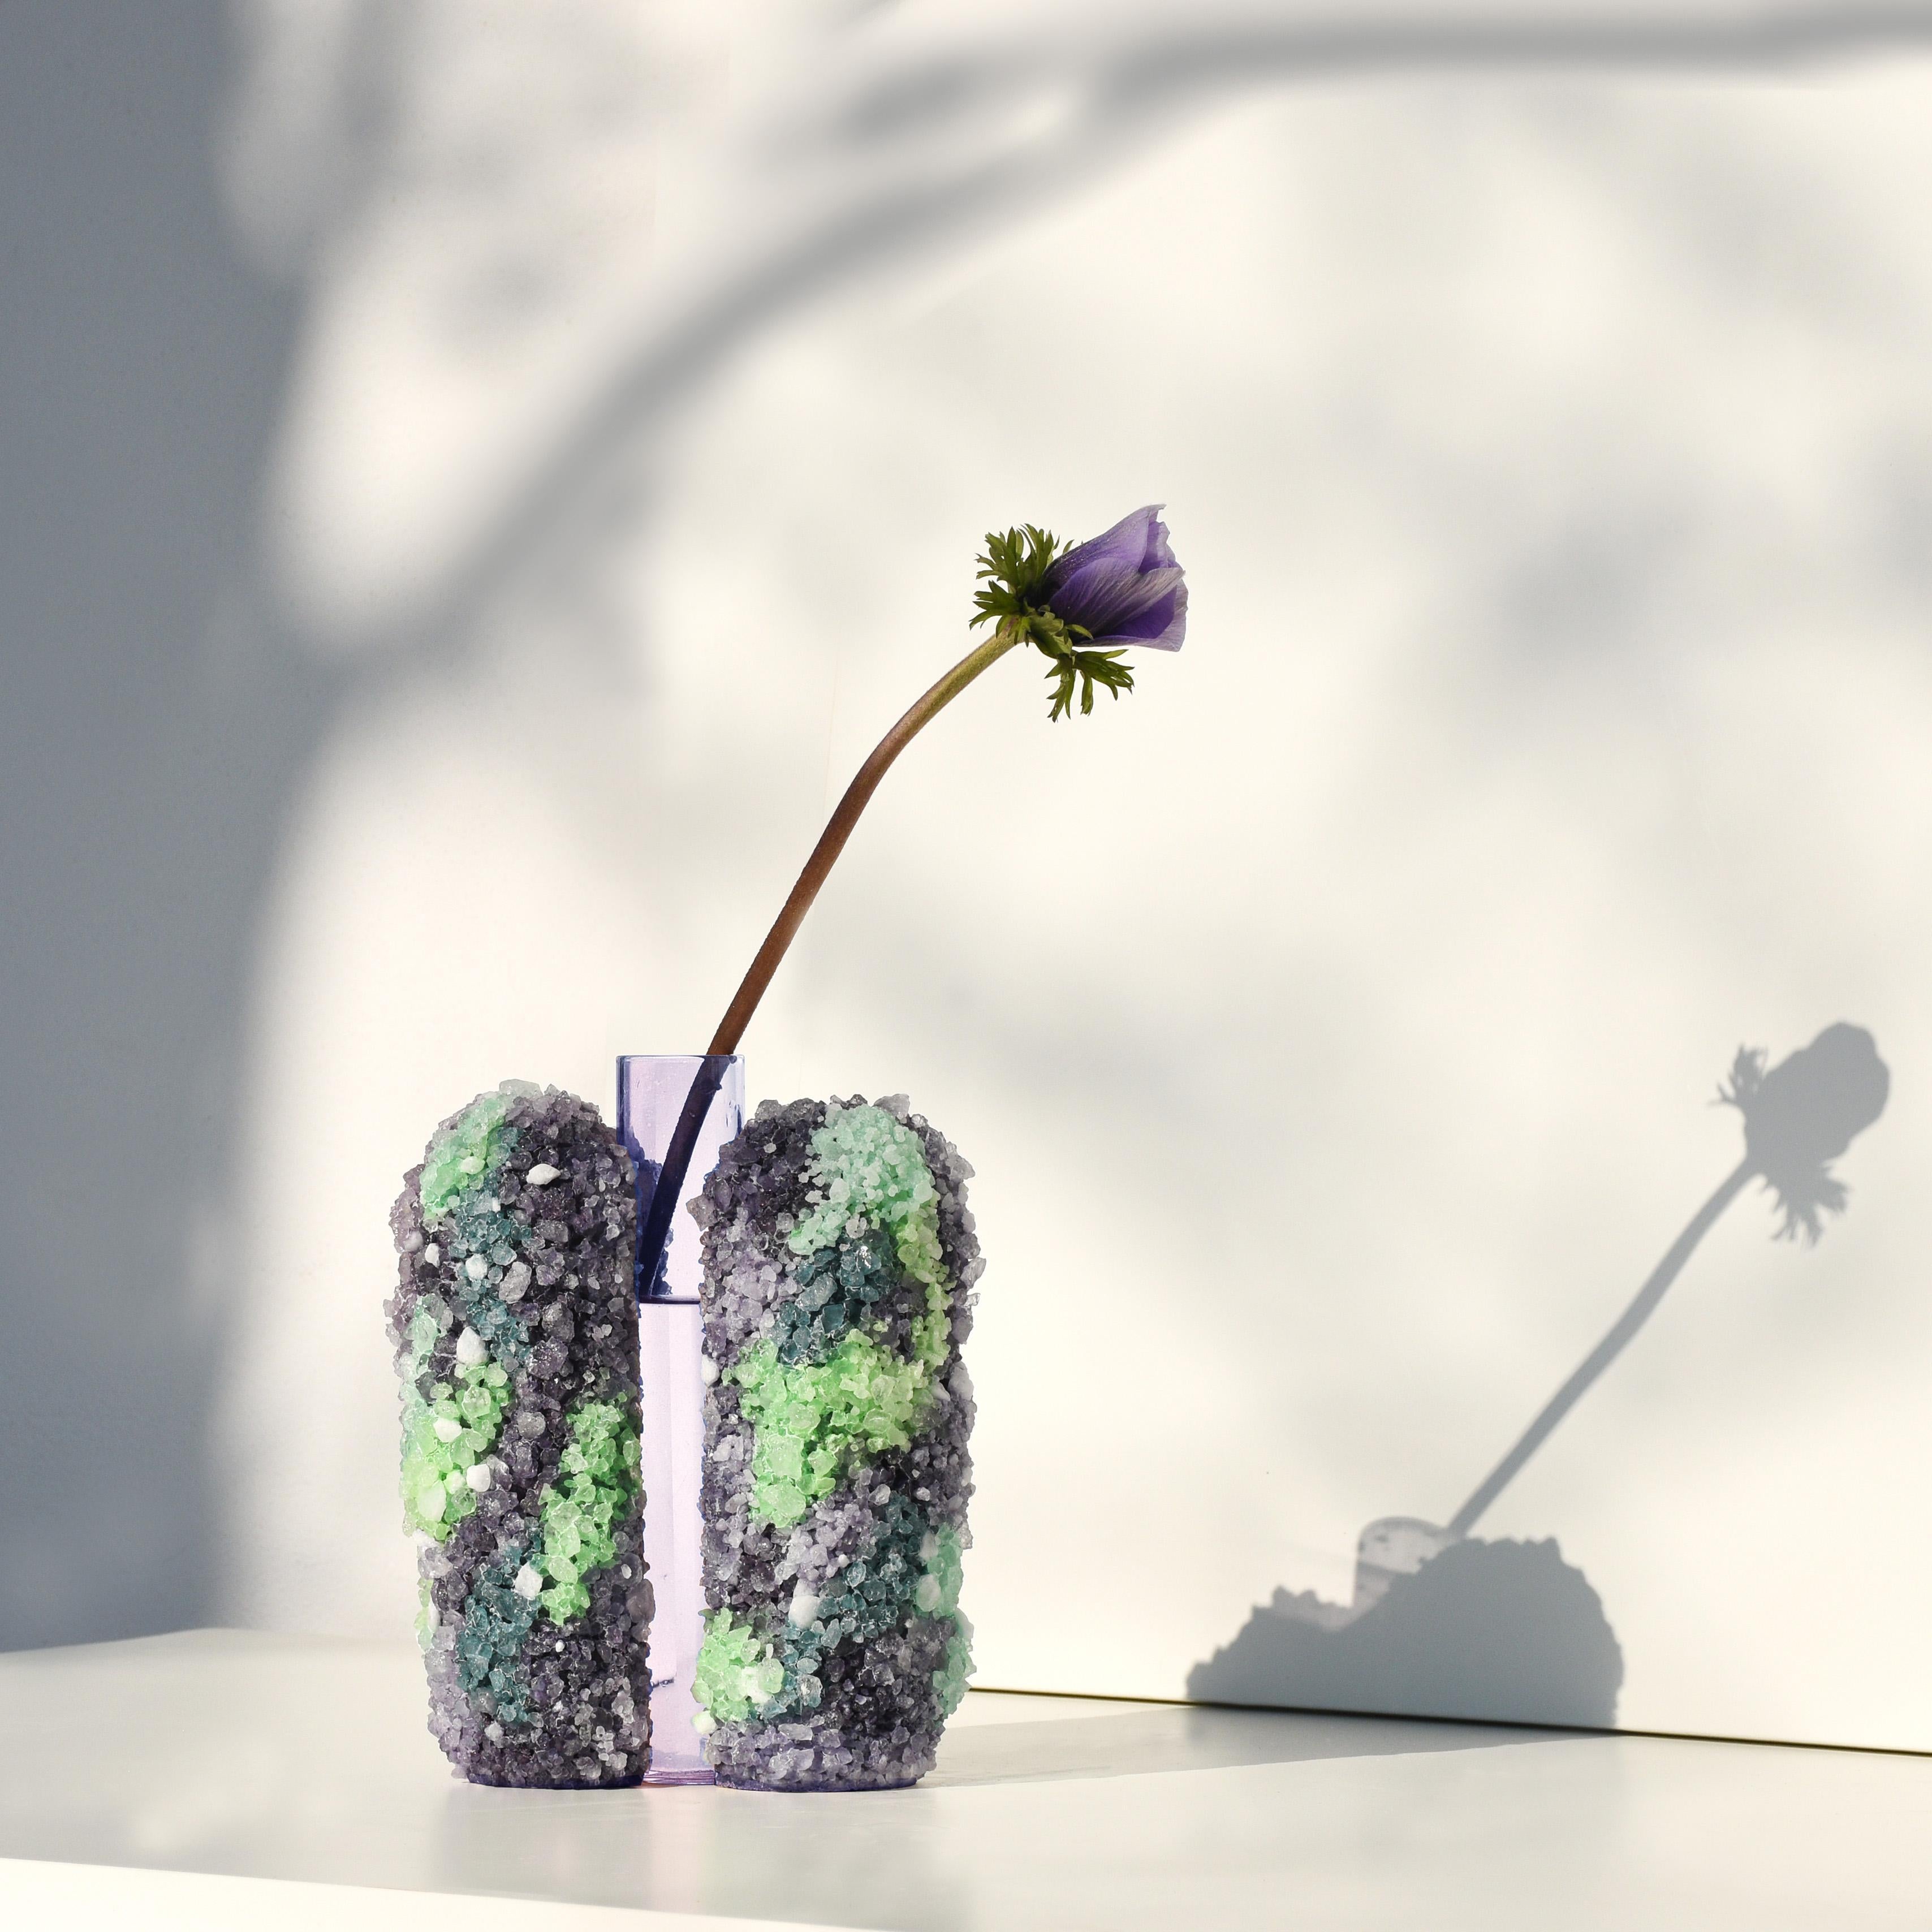 The Papilio Iridescentia vase is an exclusive design inspired by the life cycle of Lepidoptera, from the chrysalis (Chrysallis) to the butterfly (Papilio). The Chrysallis vase represents the phase in which the external casing of the wings, full of